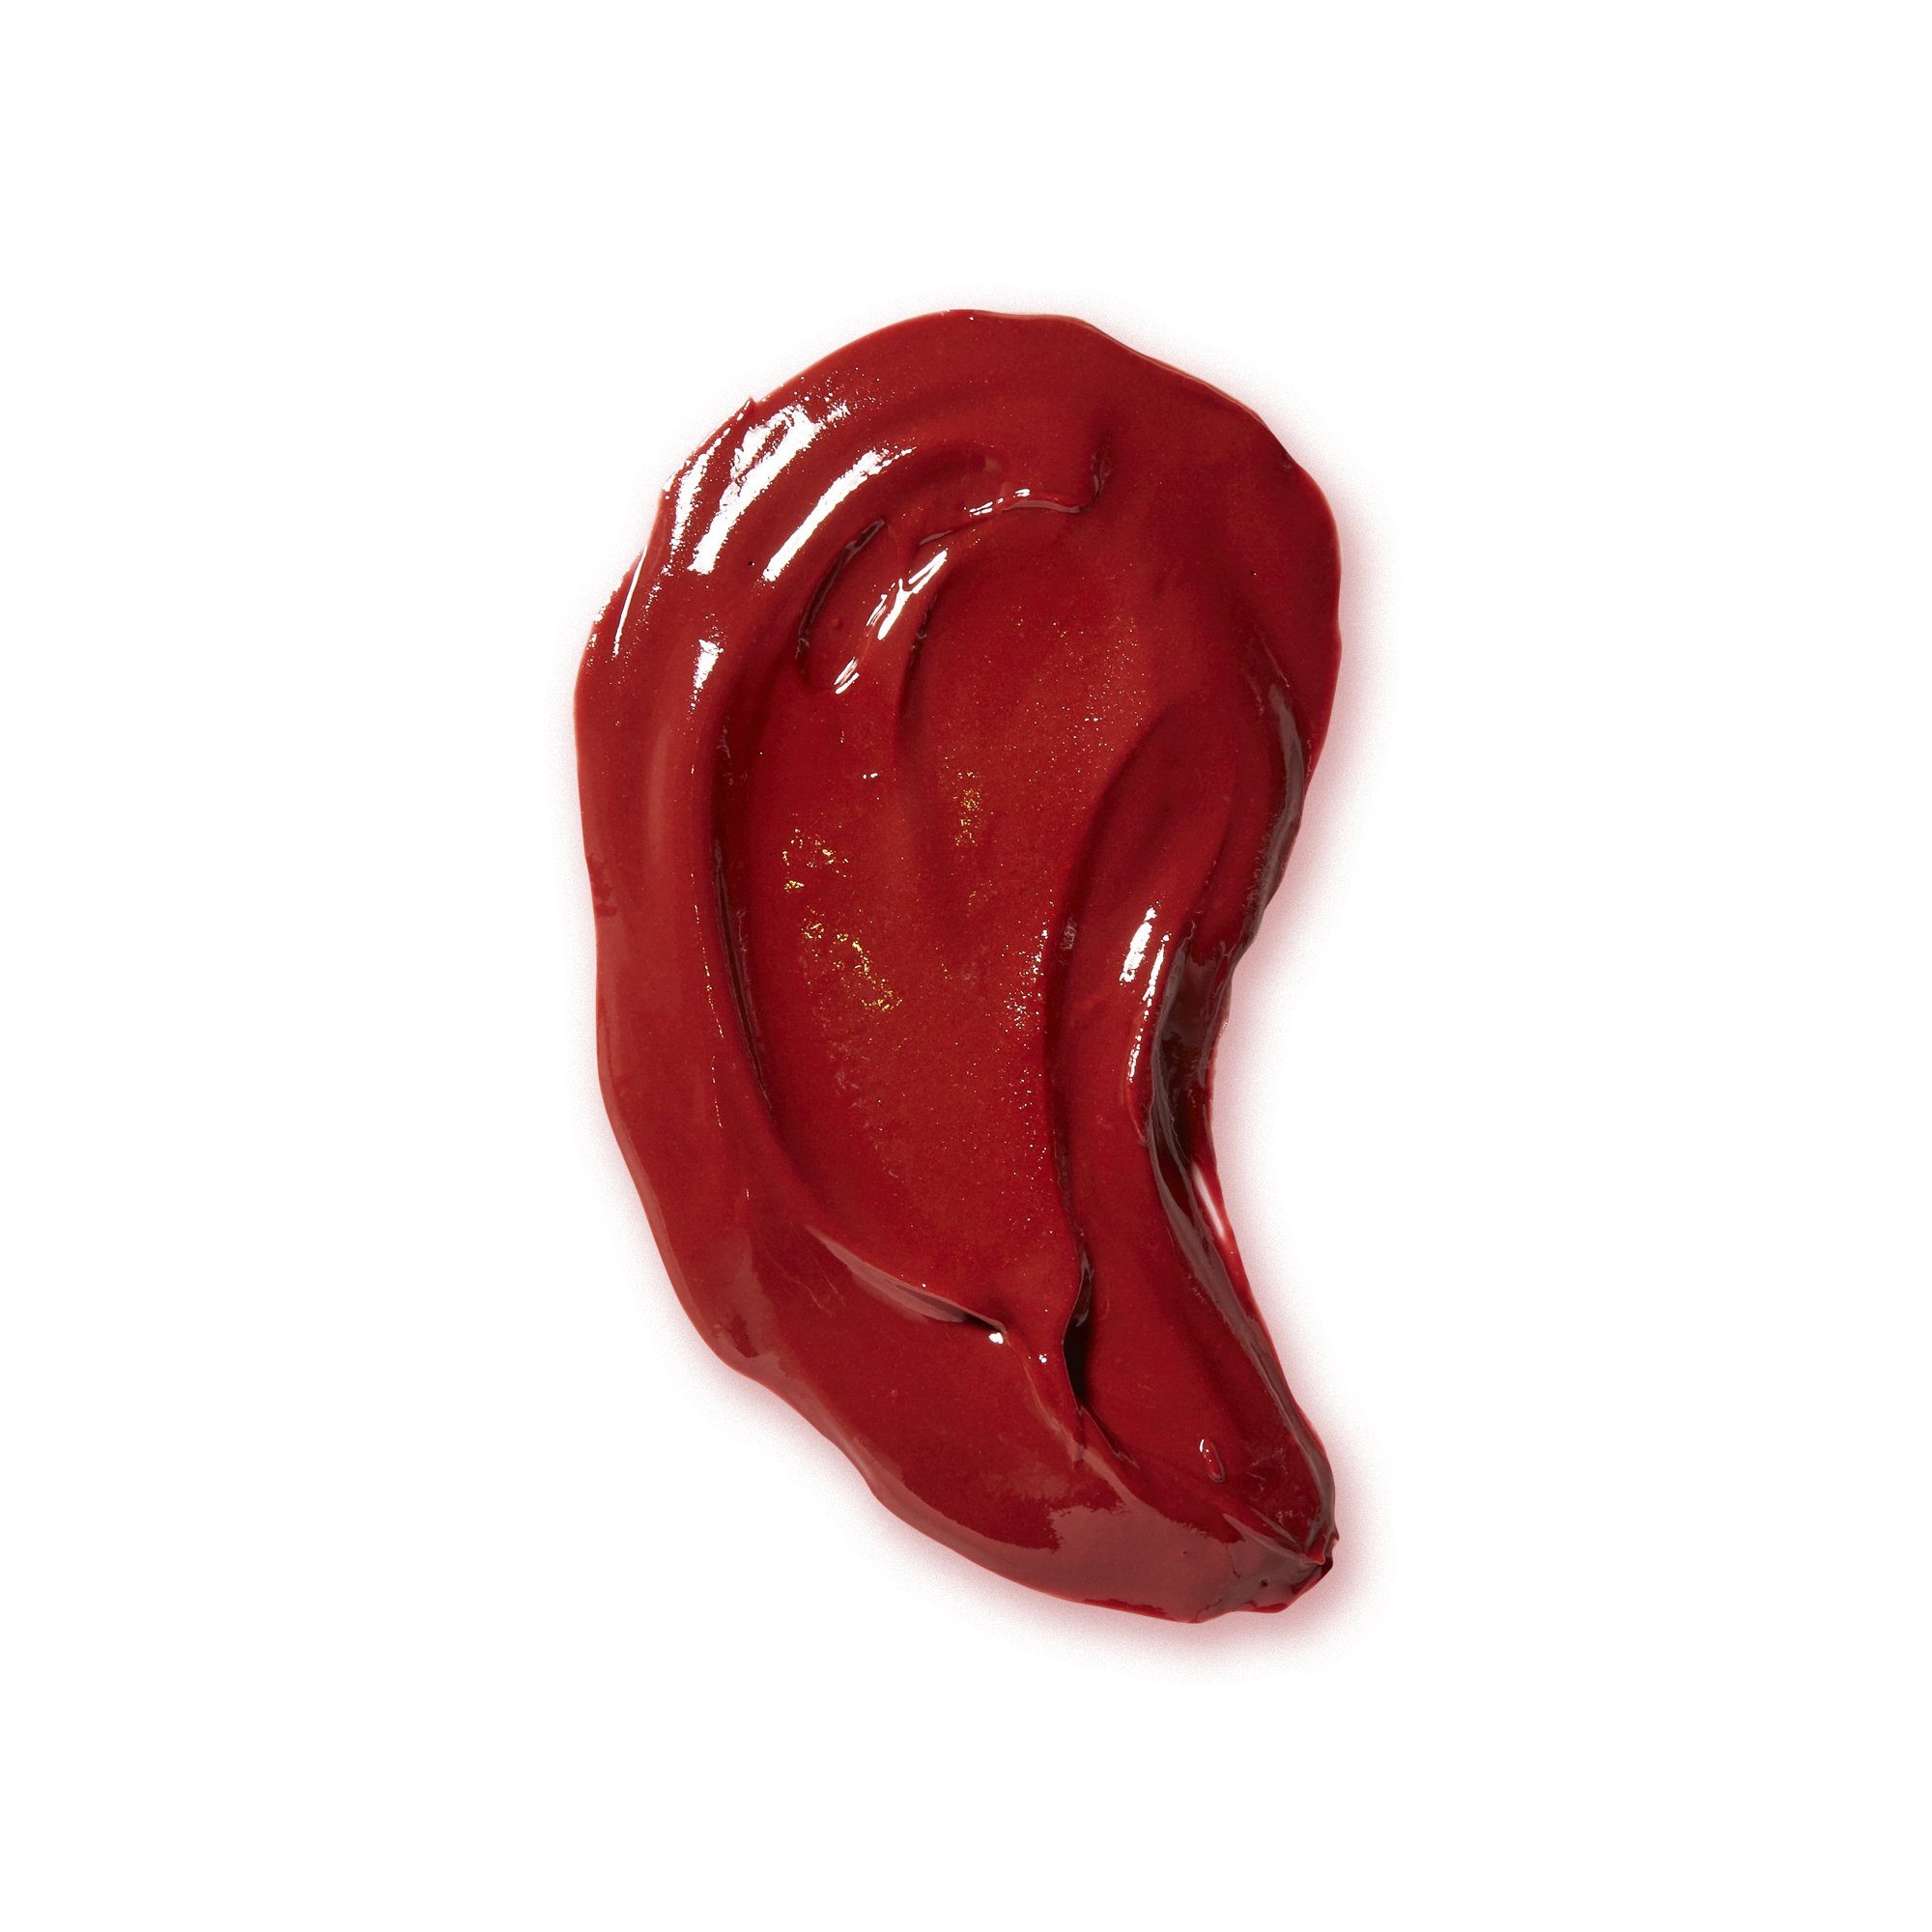 Ruby (warm berry red)